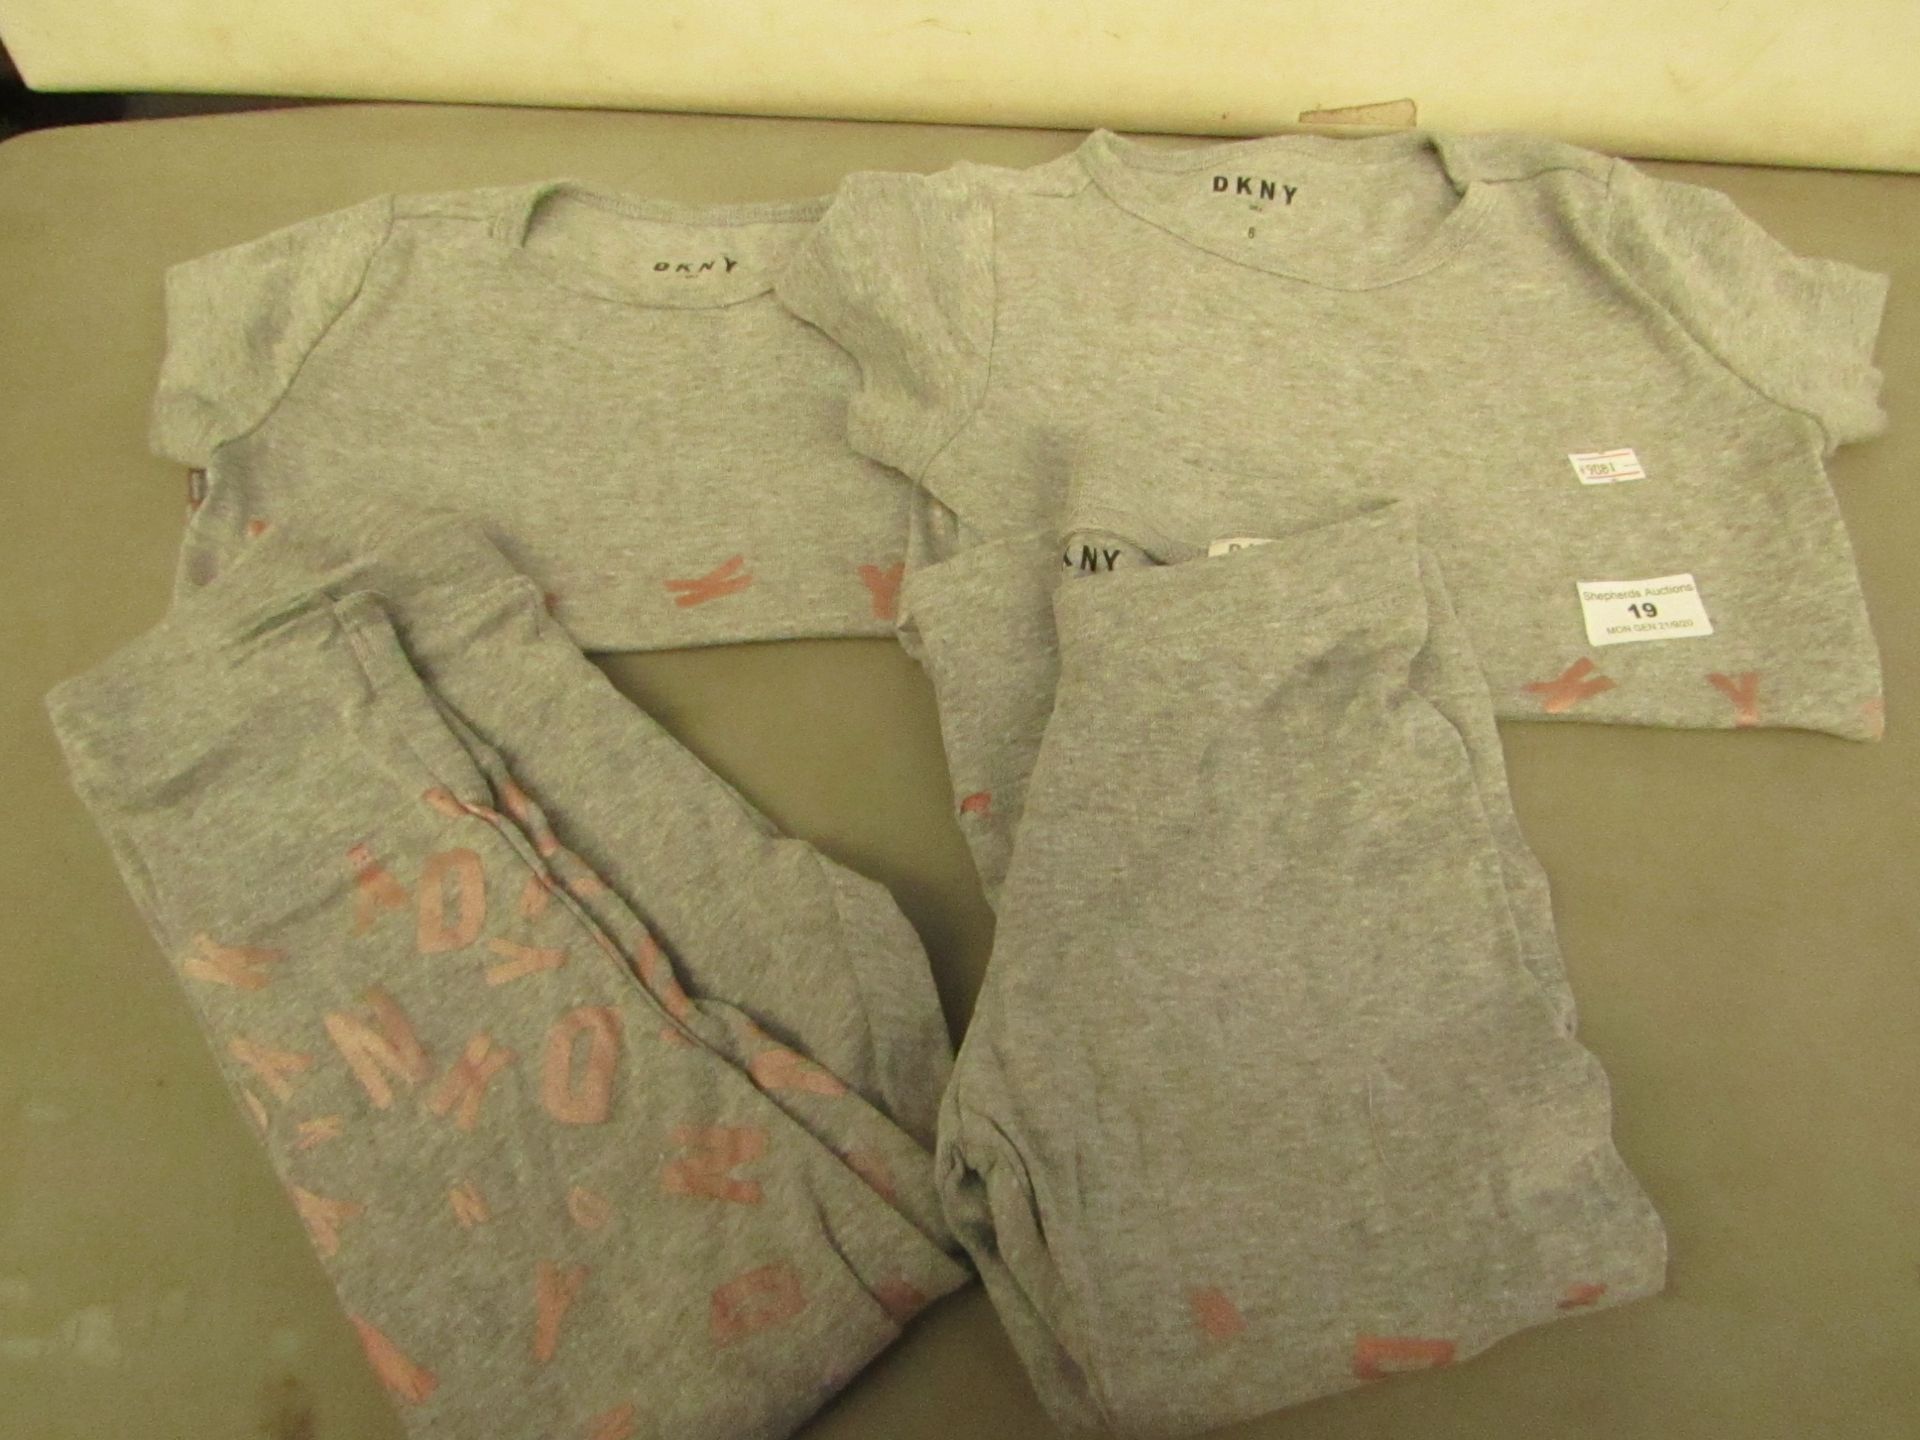 4 x DKNY Items Being 2 Pairs of Joggers Size 4T & Size 6 & 2 x Tops 1 Being size 4T & the other Size